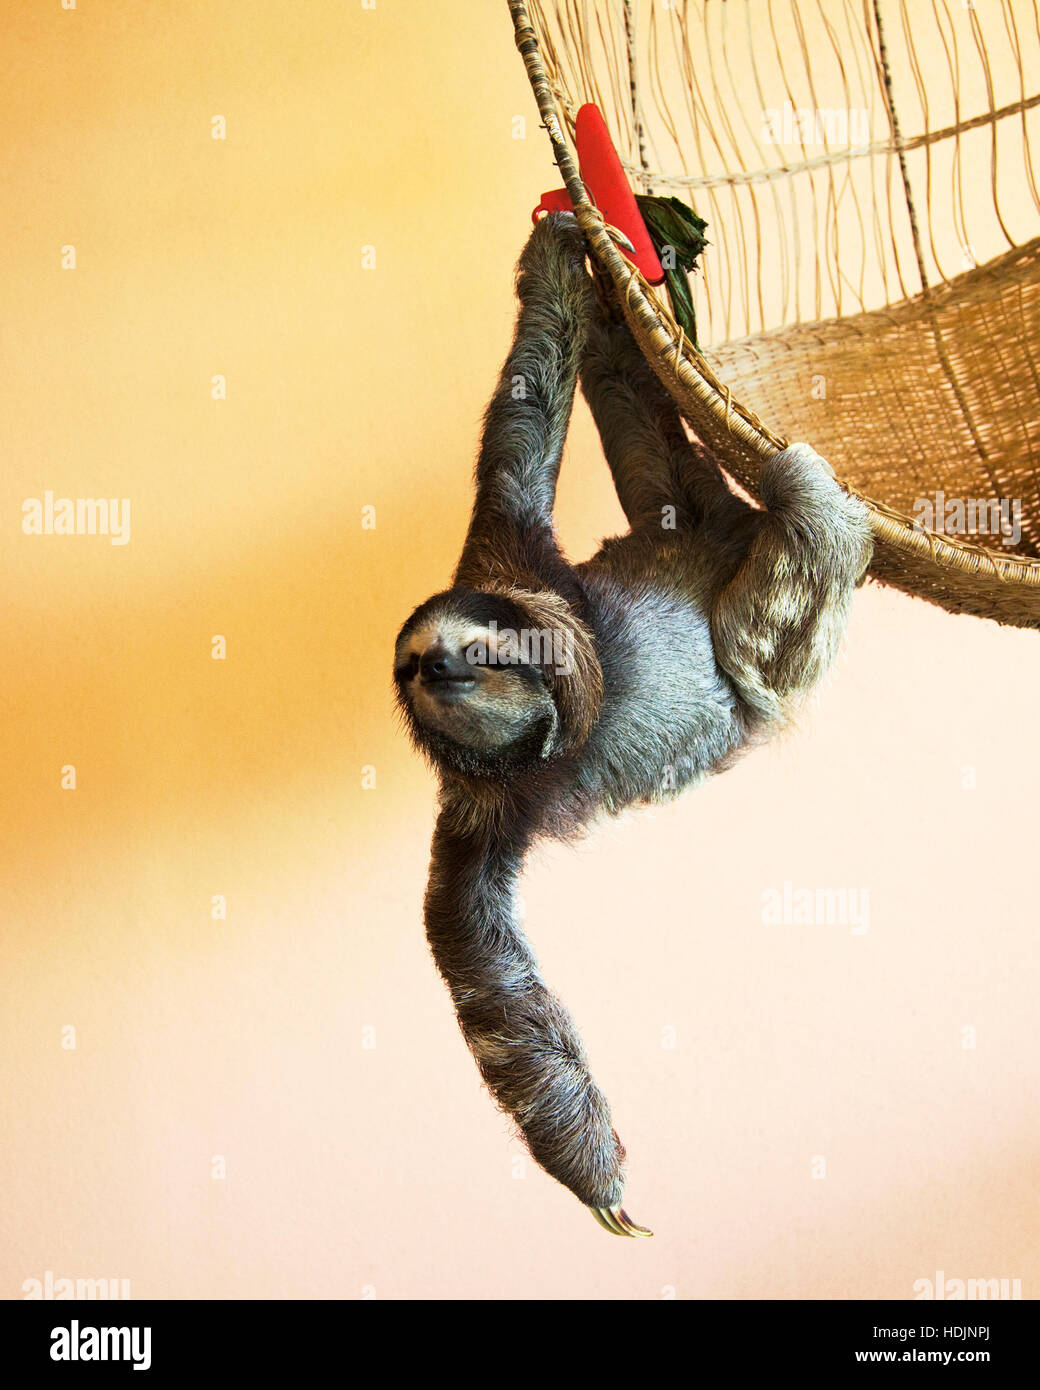 Rescued Three-toed Sloth (Bradypus variegatus) hanging from a basket at the Sloth Sanctuary of Costa Rica Stock Photo